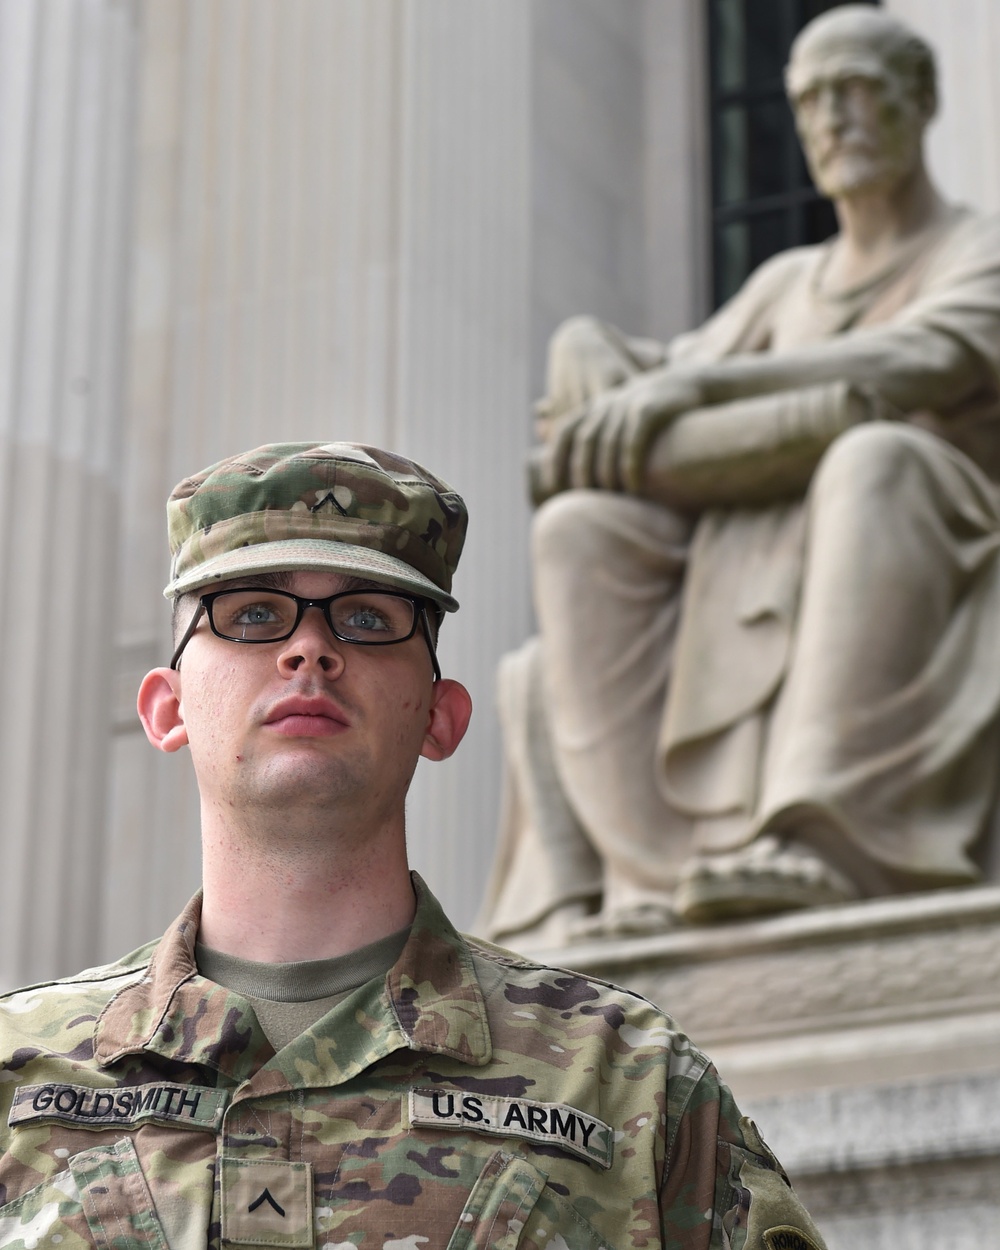 Army Private Corbin Goldsmith supports the 58th Presidential Inauguration